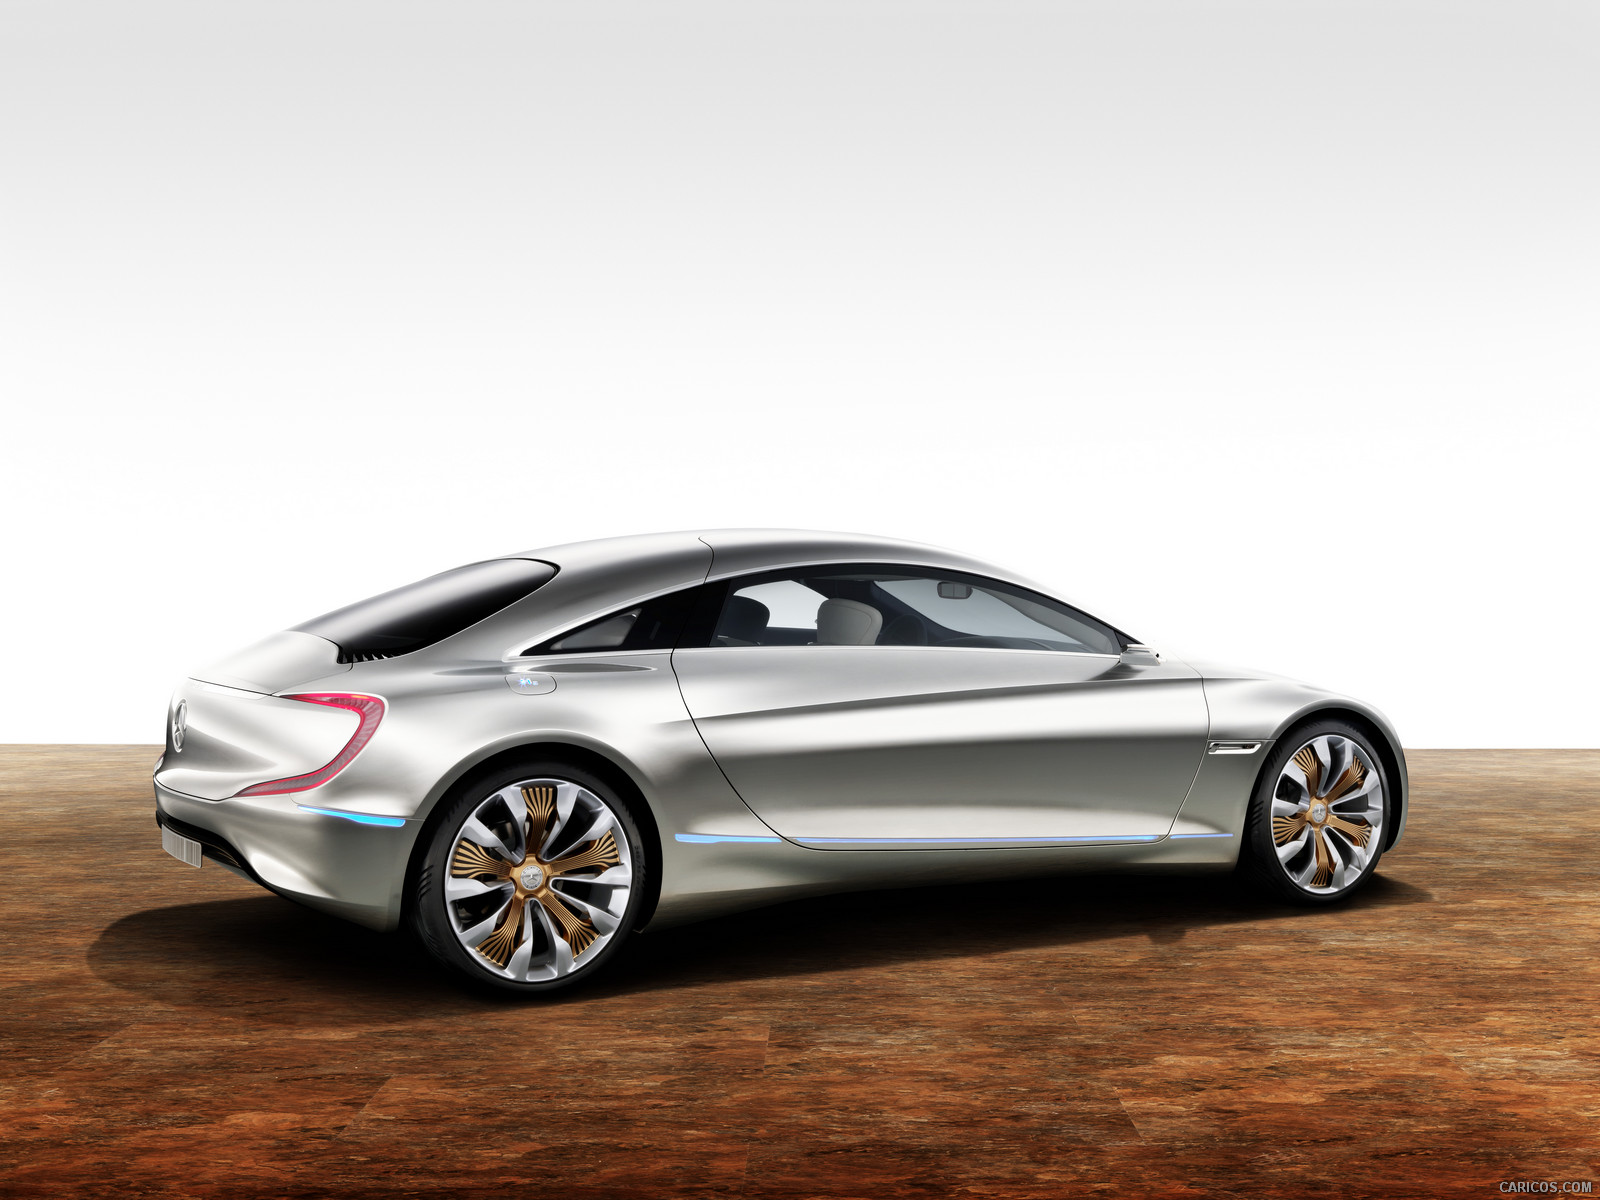 Mercedes-Benz F 125 Concept  - Side, #22 of 63